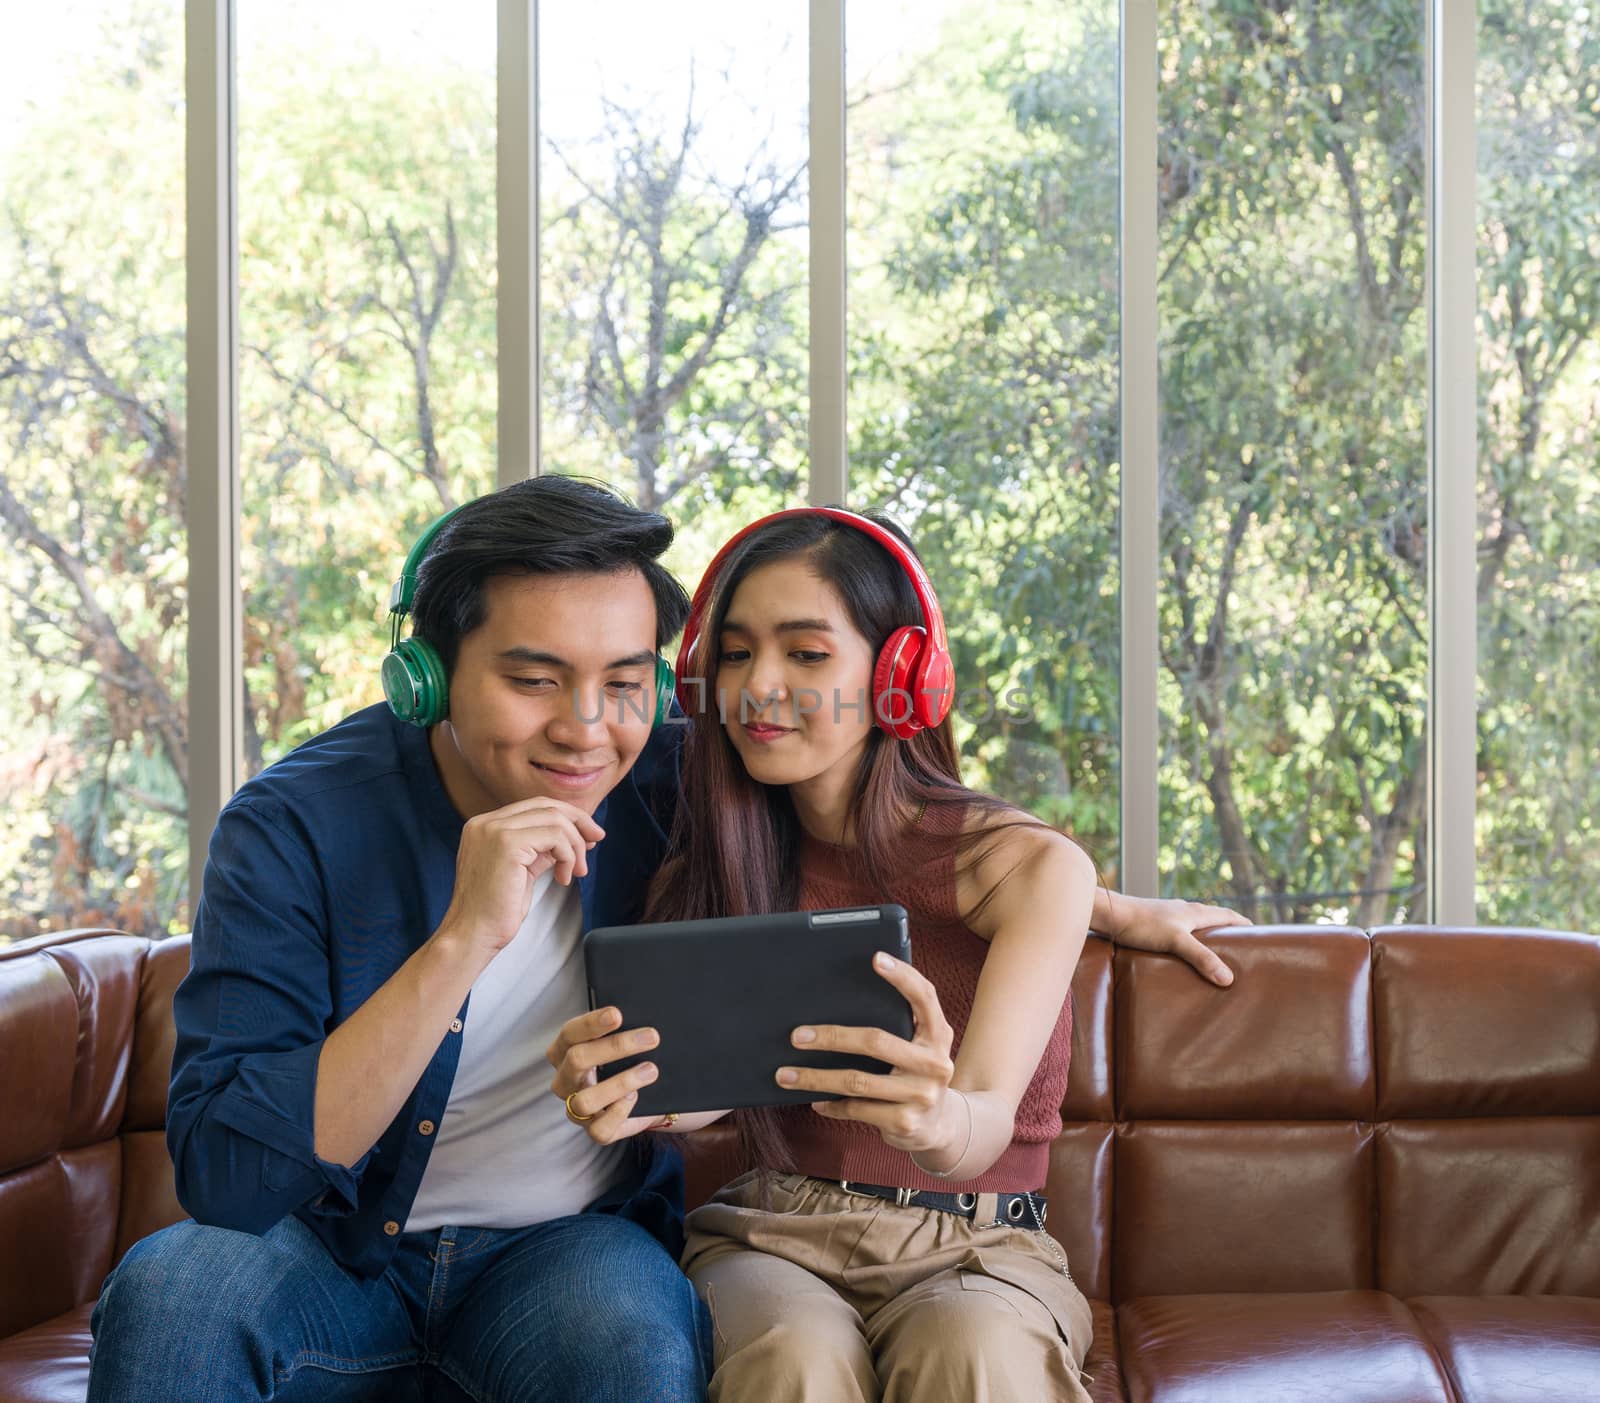 Young lovers spend time together on holidays in the living room. Both are interested in music from headphones  while the woman holding tablet computer.